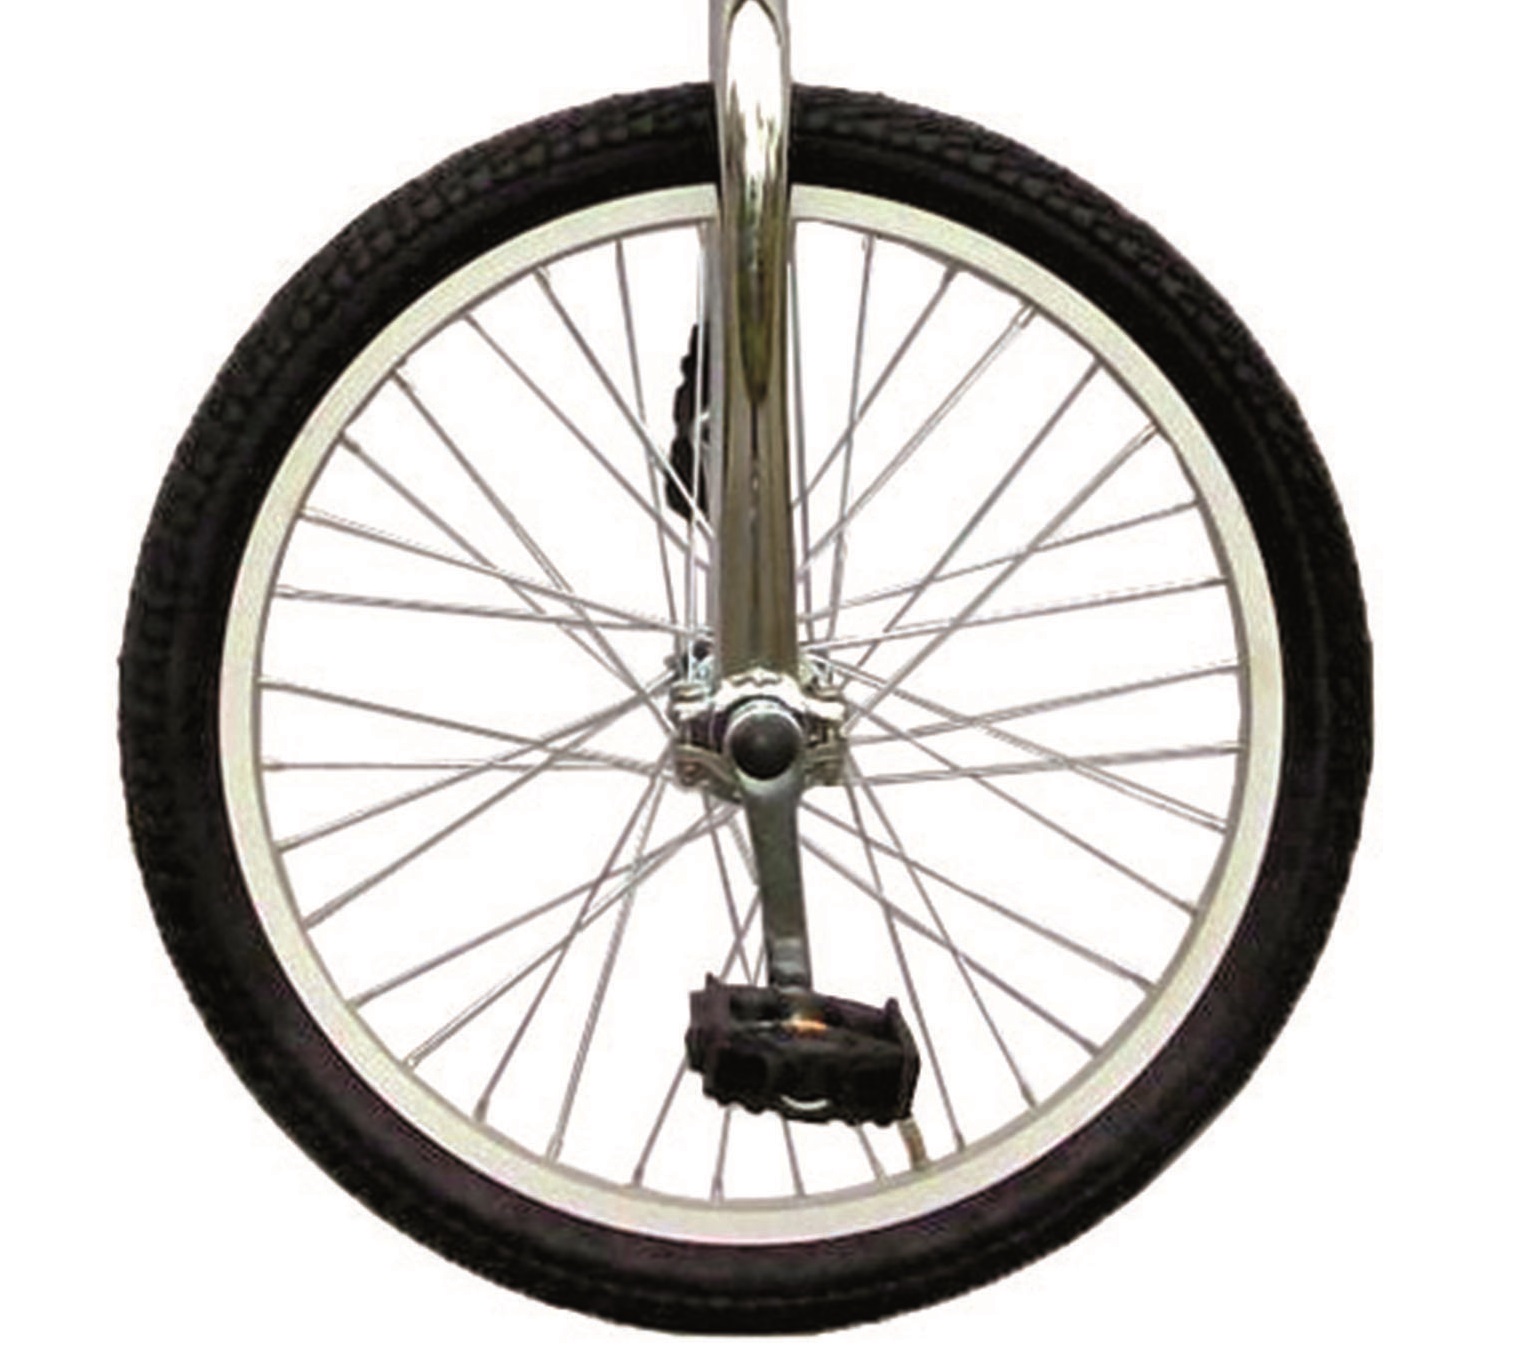 Fun 20 inch Unicycle with Alloy Rim, Chrome - image 3 of 5